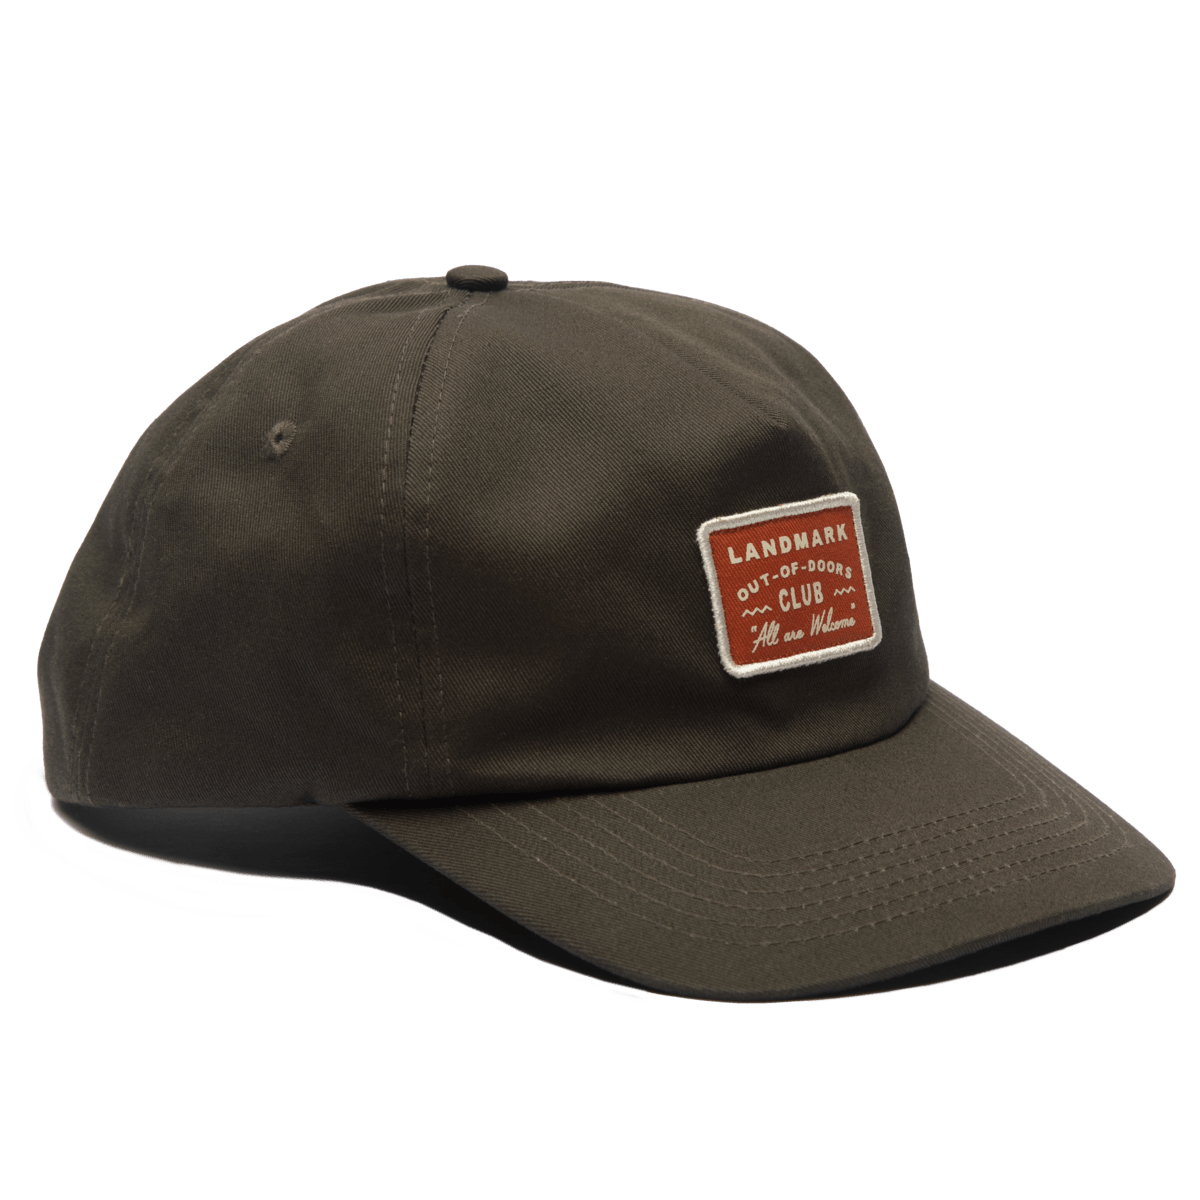 Out-of-Doors Club Hat - Nubian Lane Hat Co.